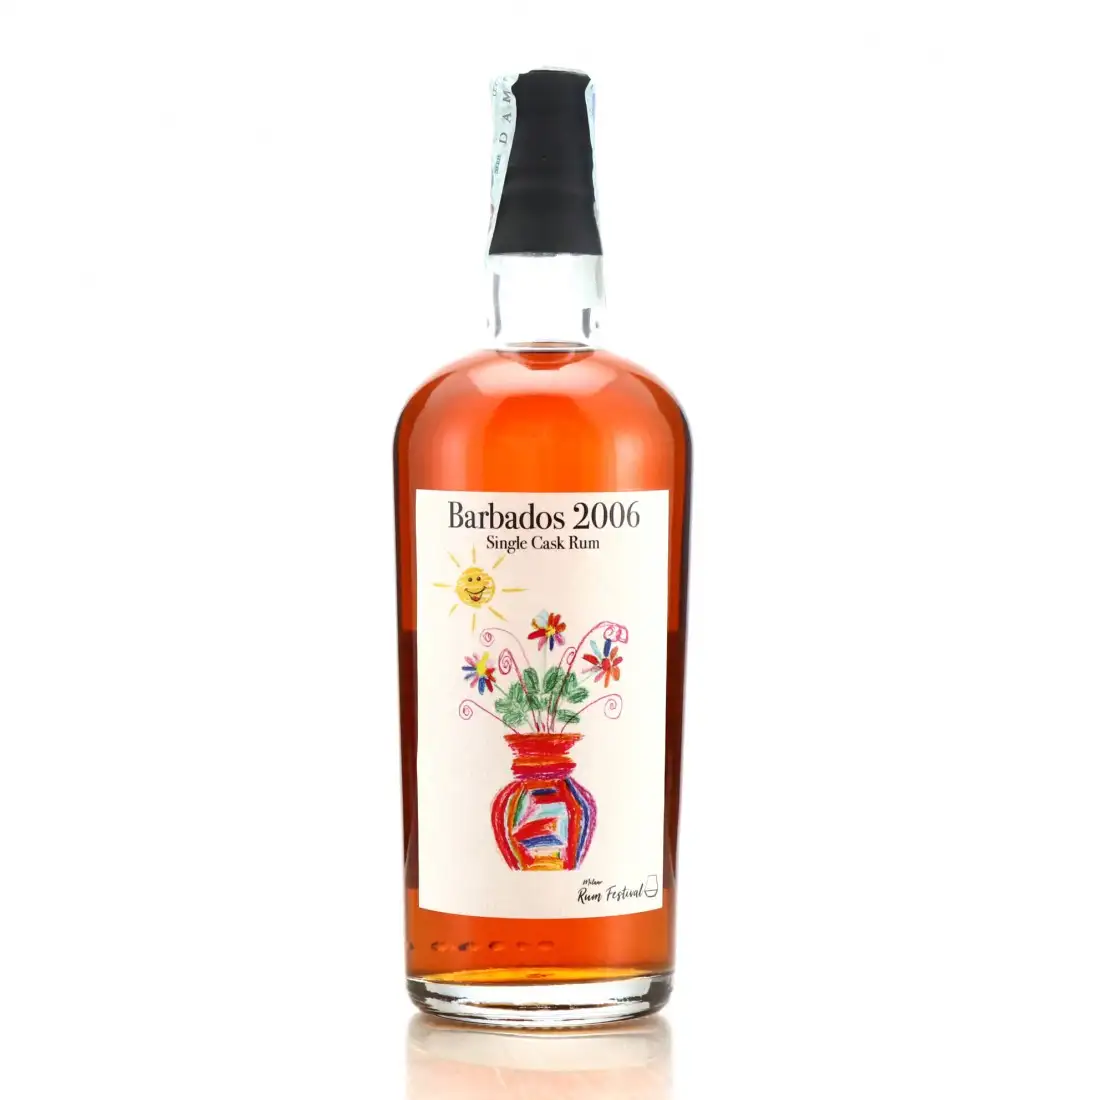 Image of the front of the bottle of the rum Barbados 2006